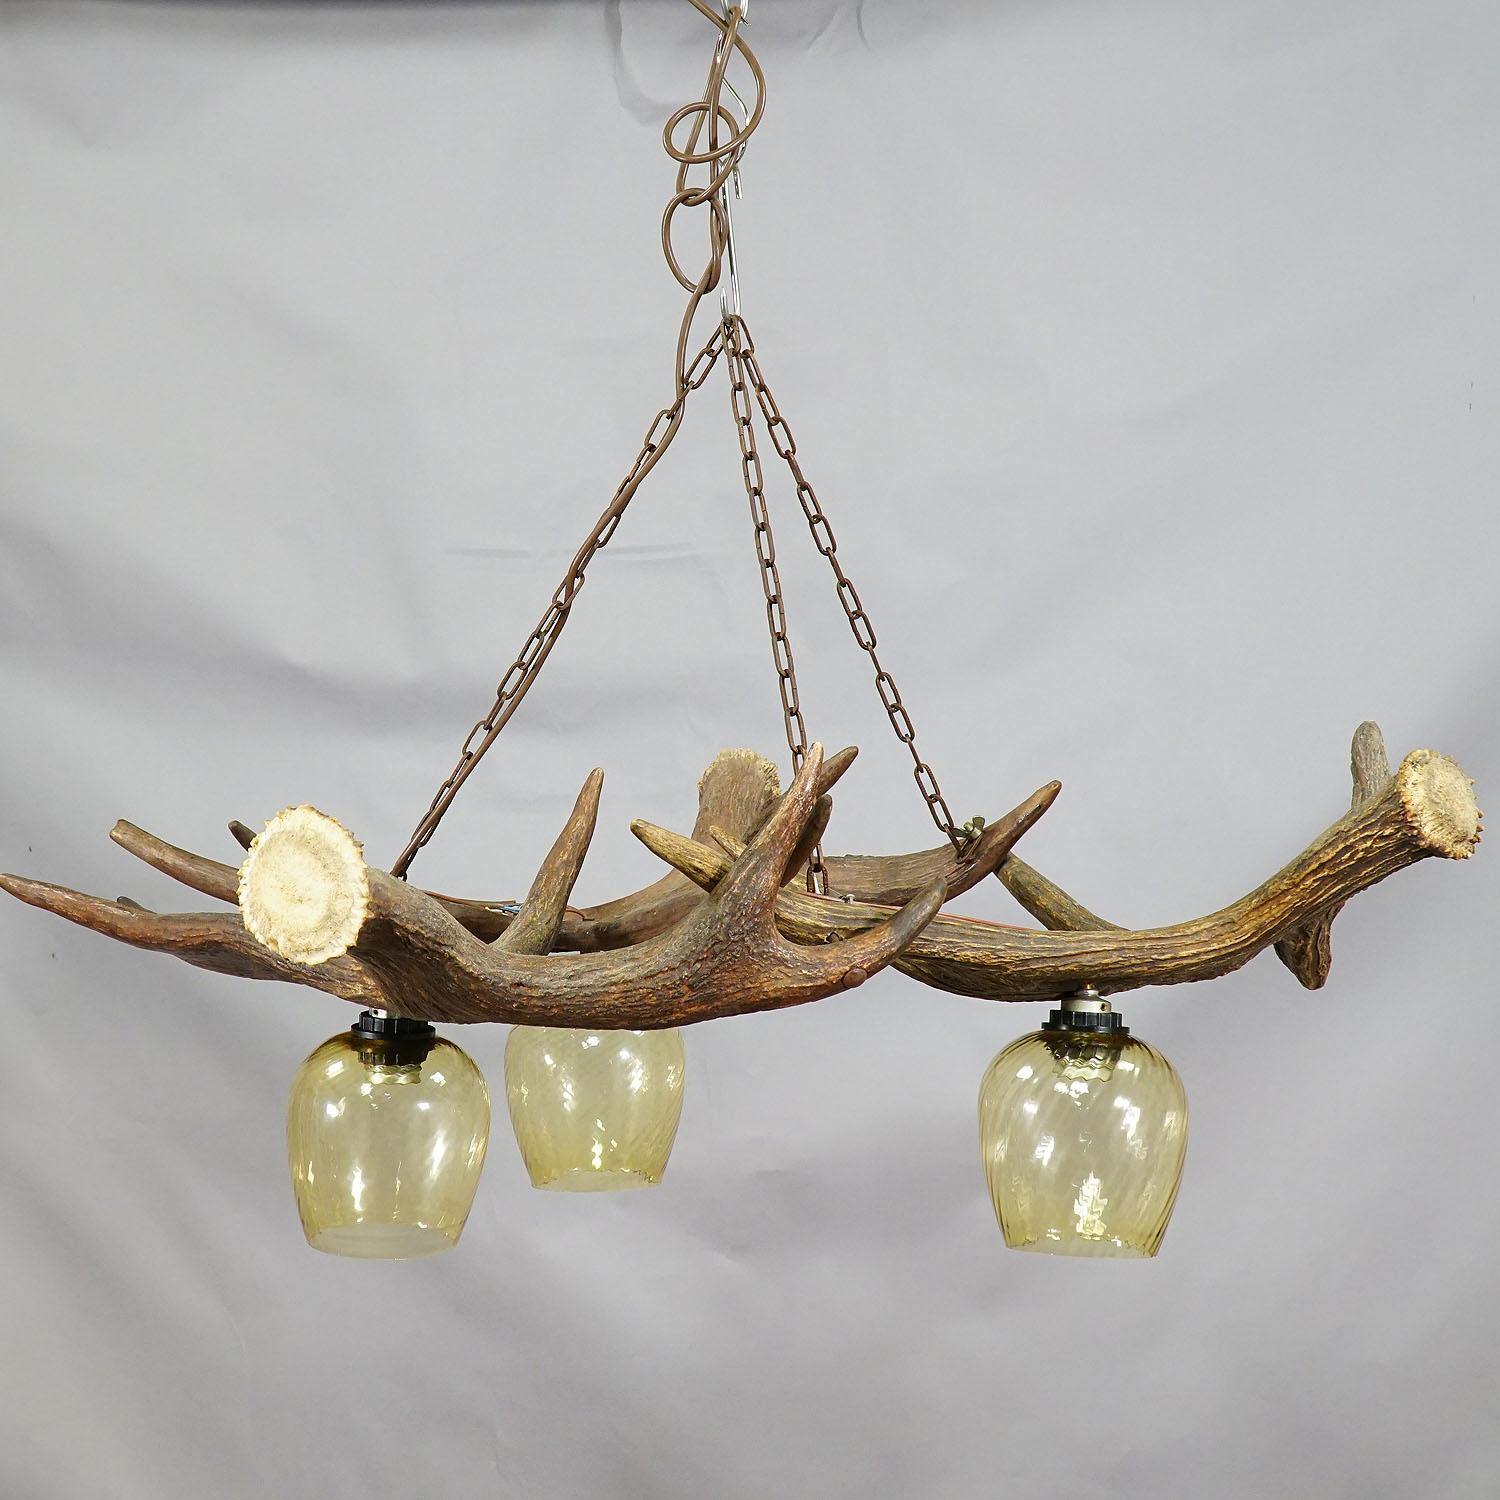 Black Forest Rustic Antler Lamp with Elk Antlers For Sale